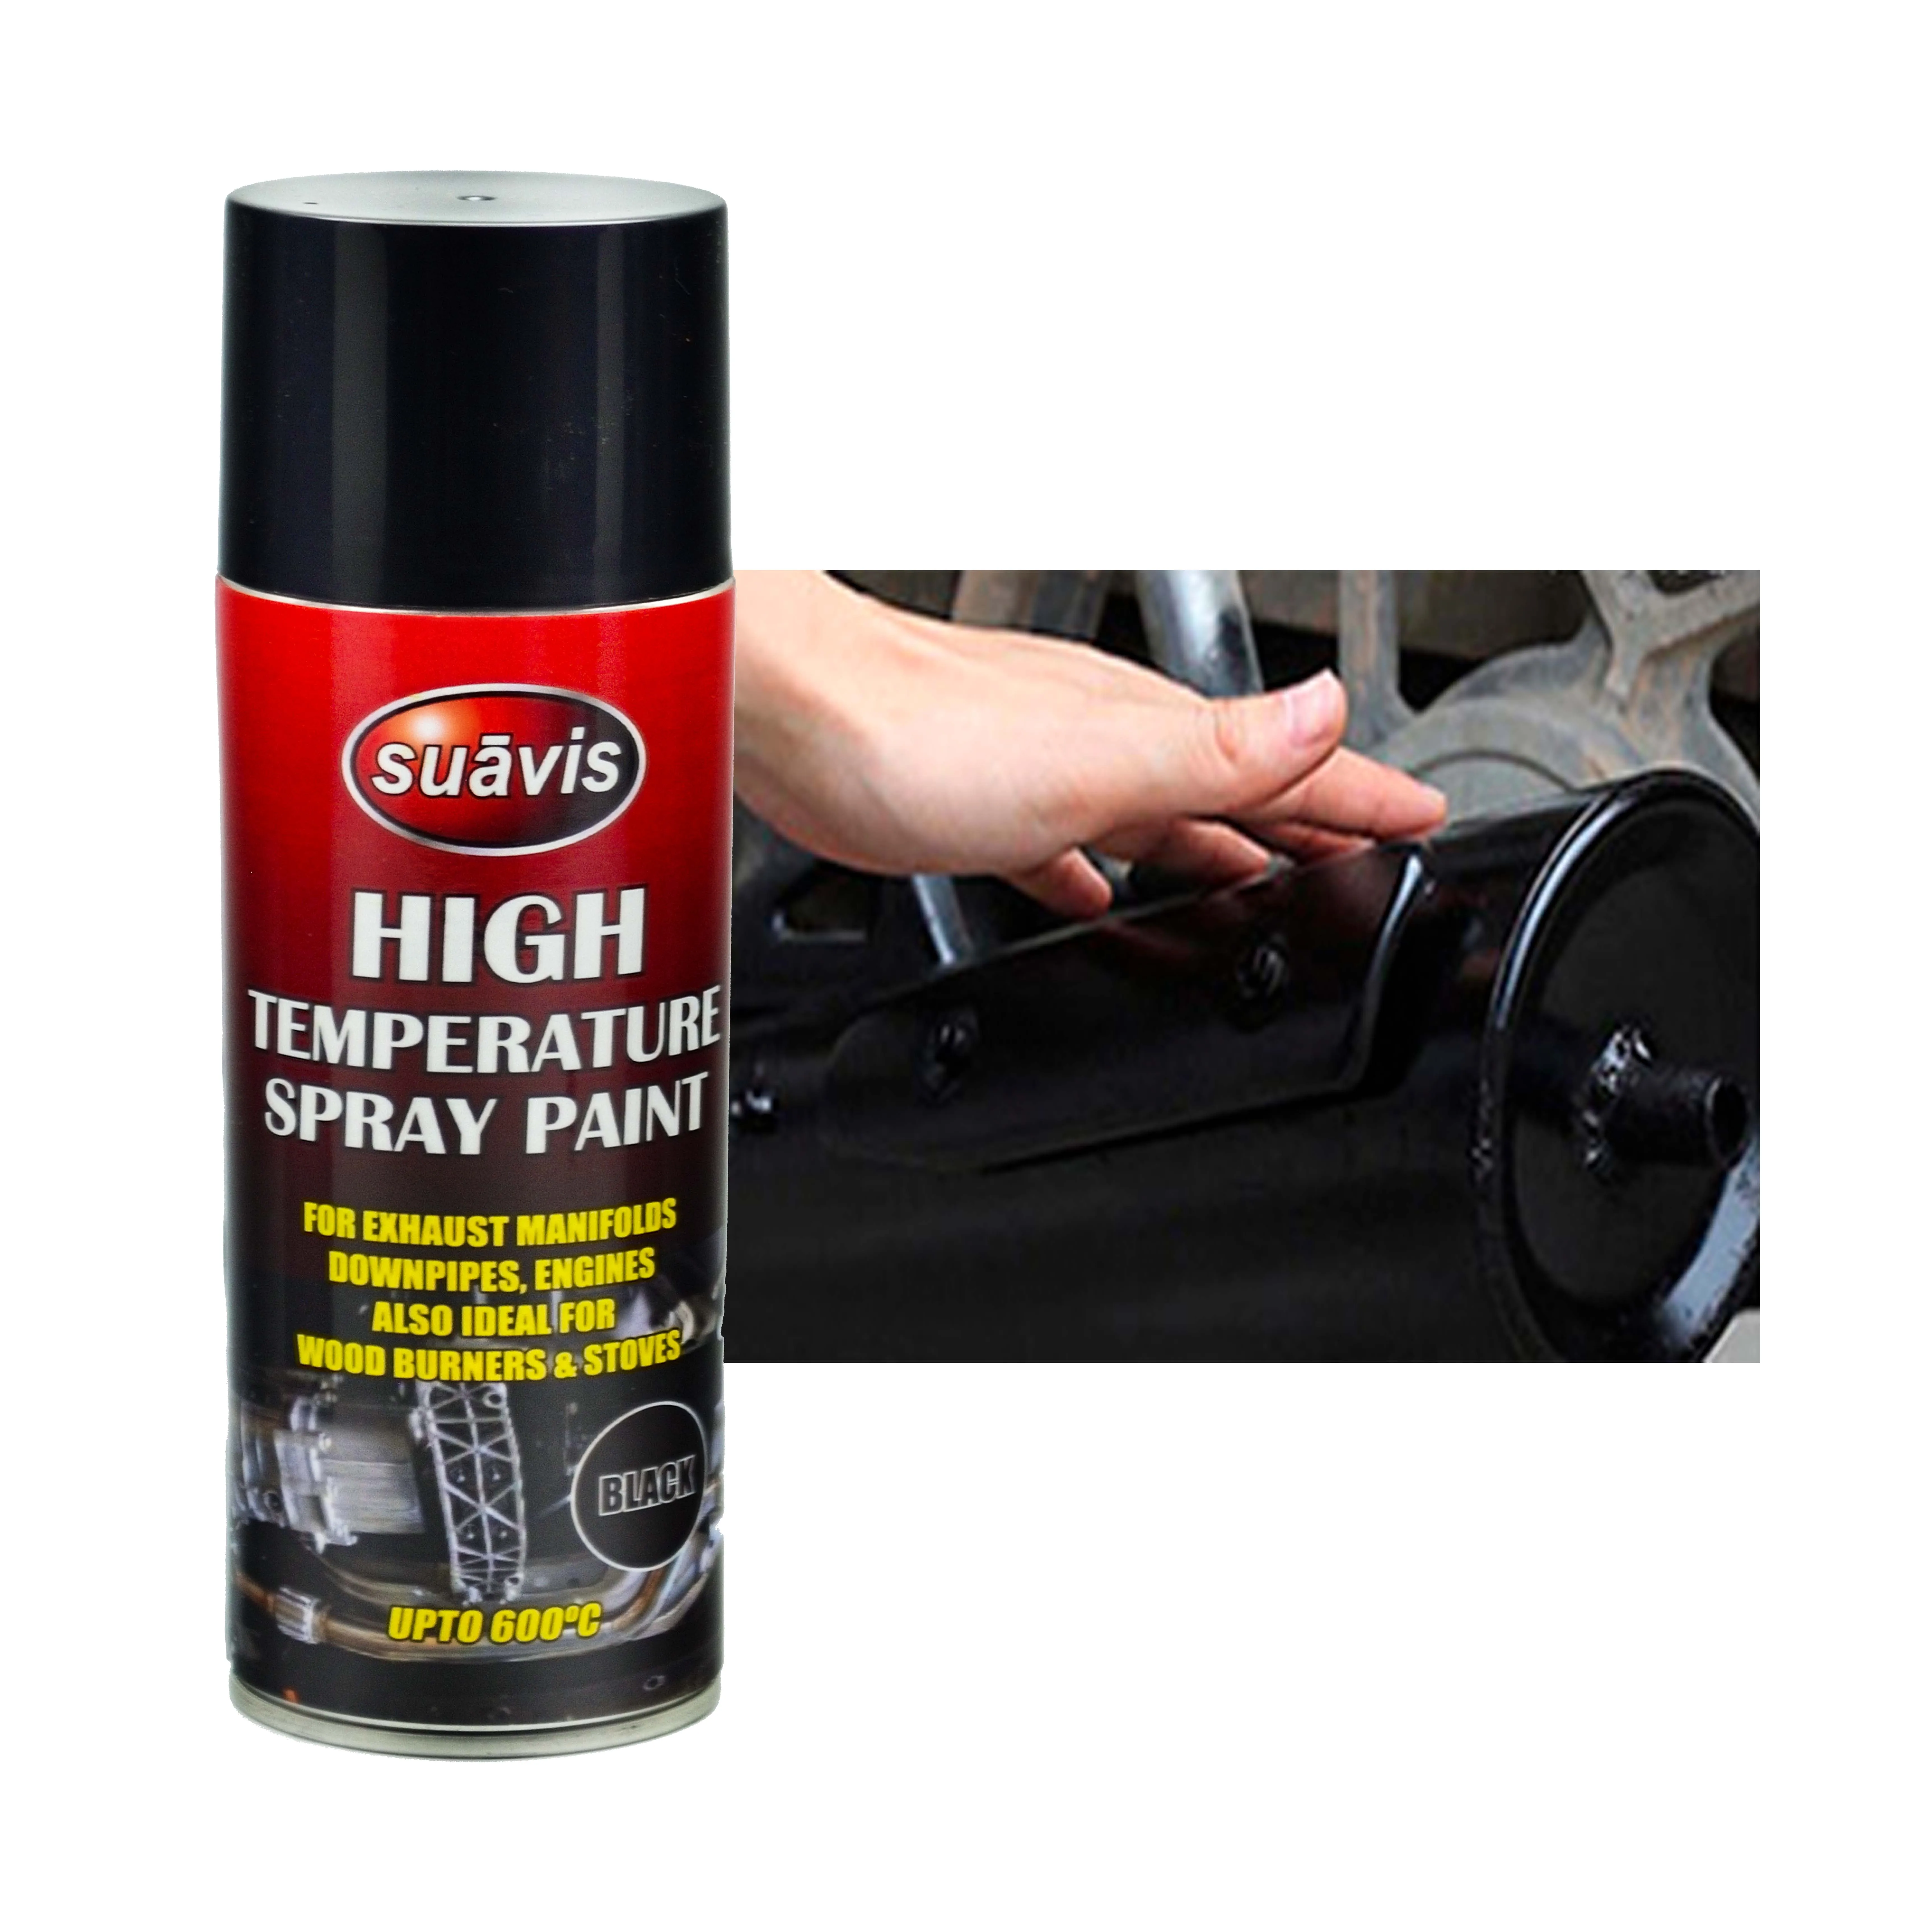 Hot Sale Stove Temperature Paint For Motorcycle High Temperature Spray Paint Buy High Temperature Spray Paint Temperature Paint For Motorcycle High Temperature Spray Paint For Griller Product On Alibaba Com